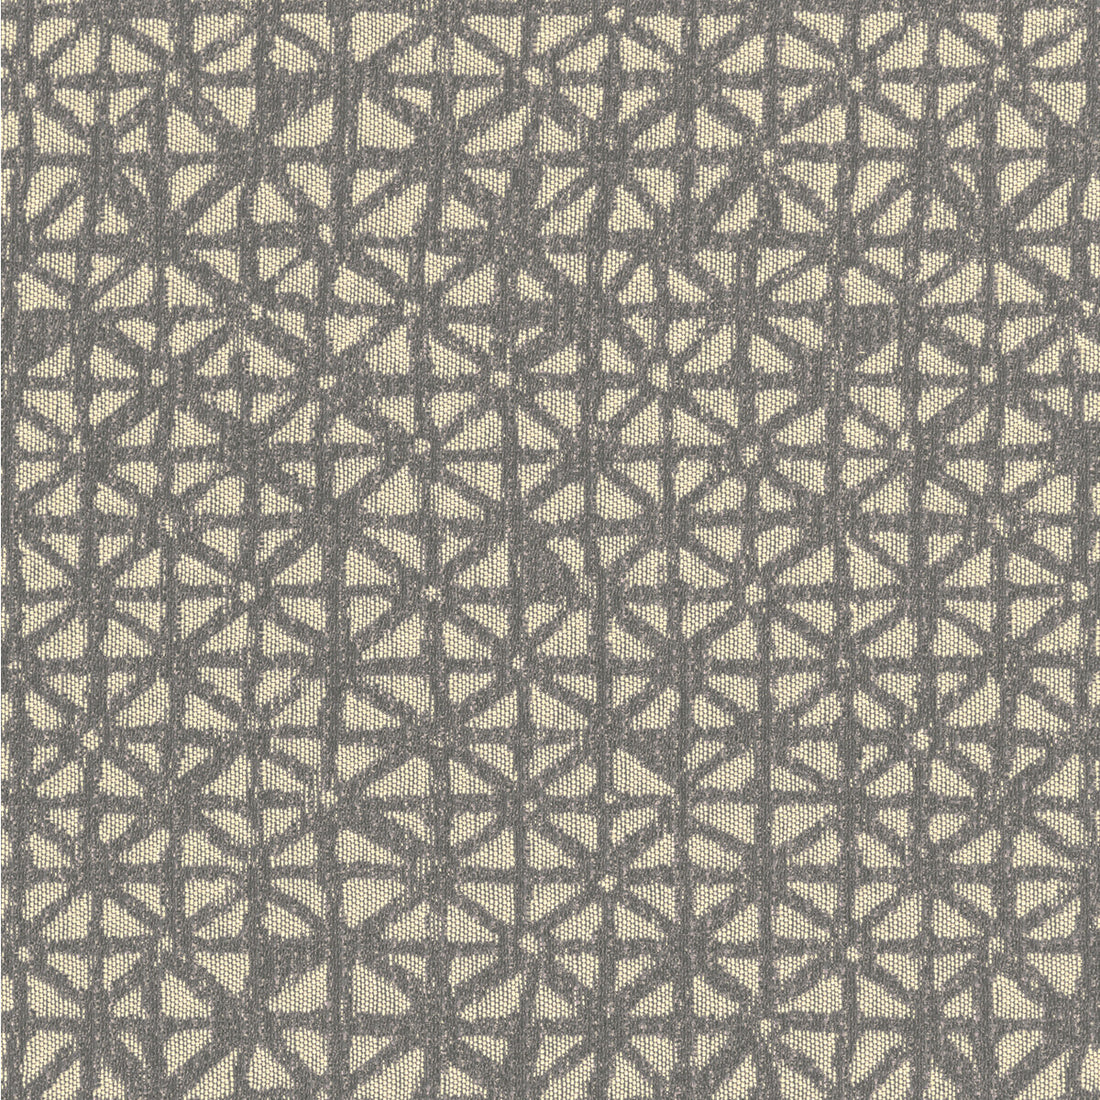 Kinzie fabric in sandstone color - pattern 36268.106.0 - by Kravet Contract in the Gis Crypton collection